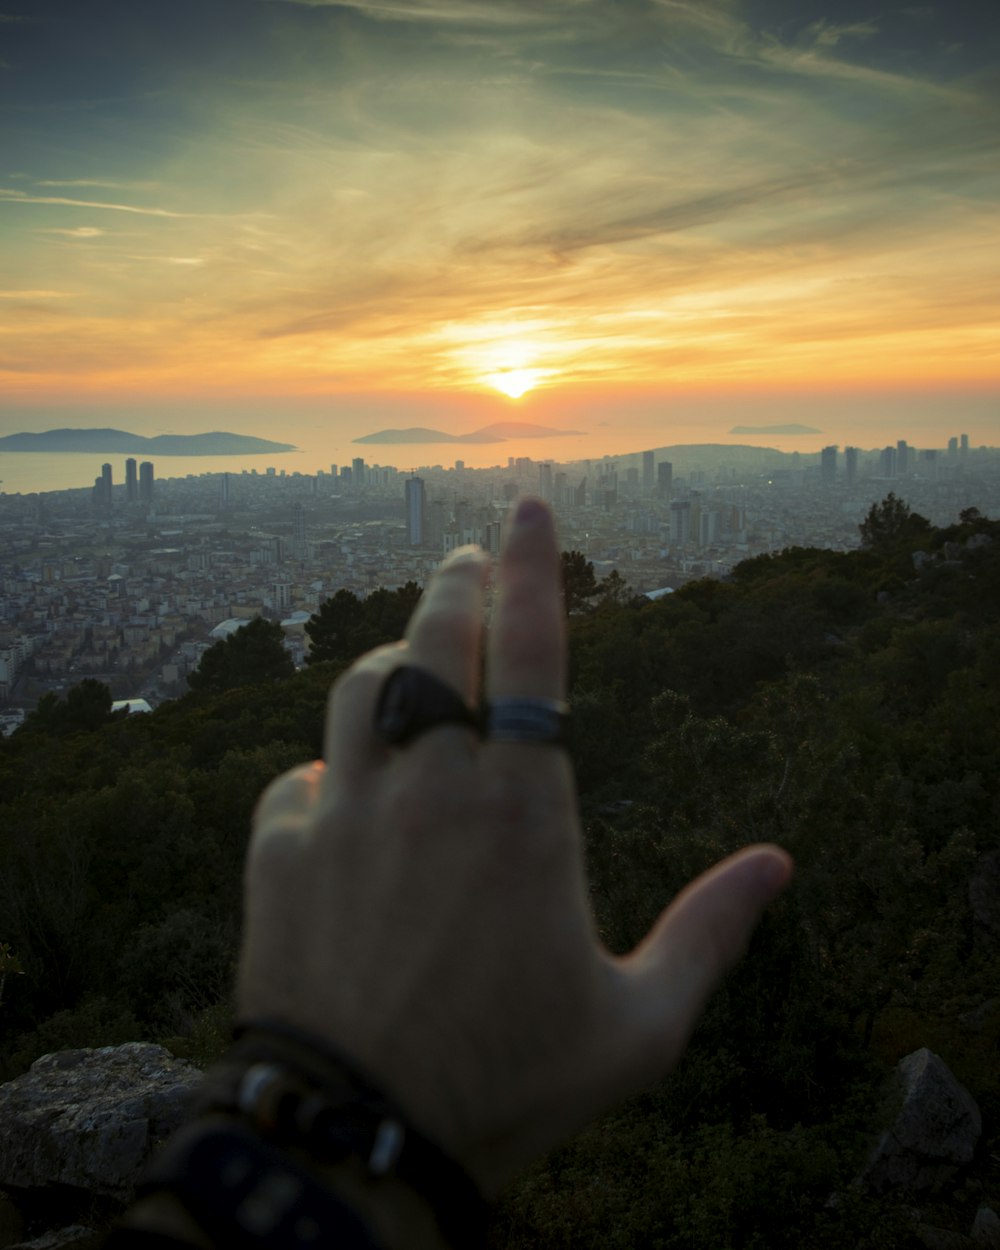 a hand pointing at the sunset over a city